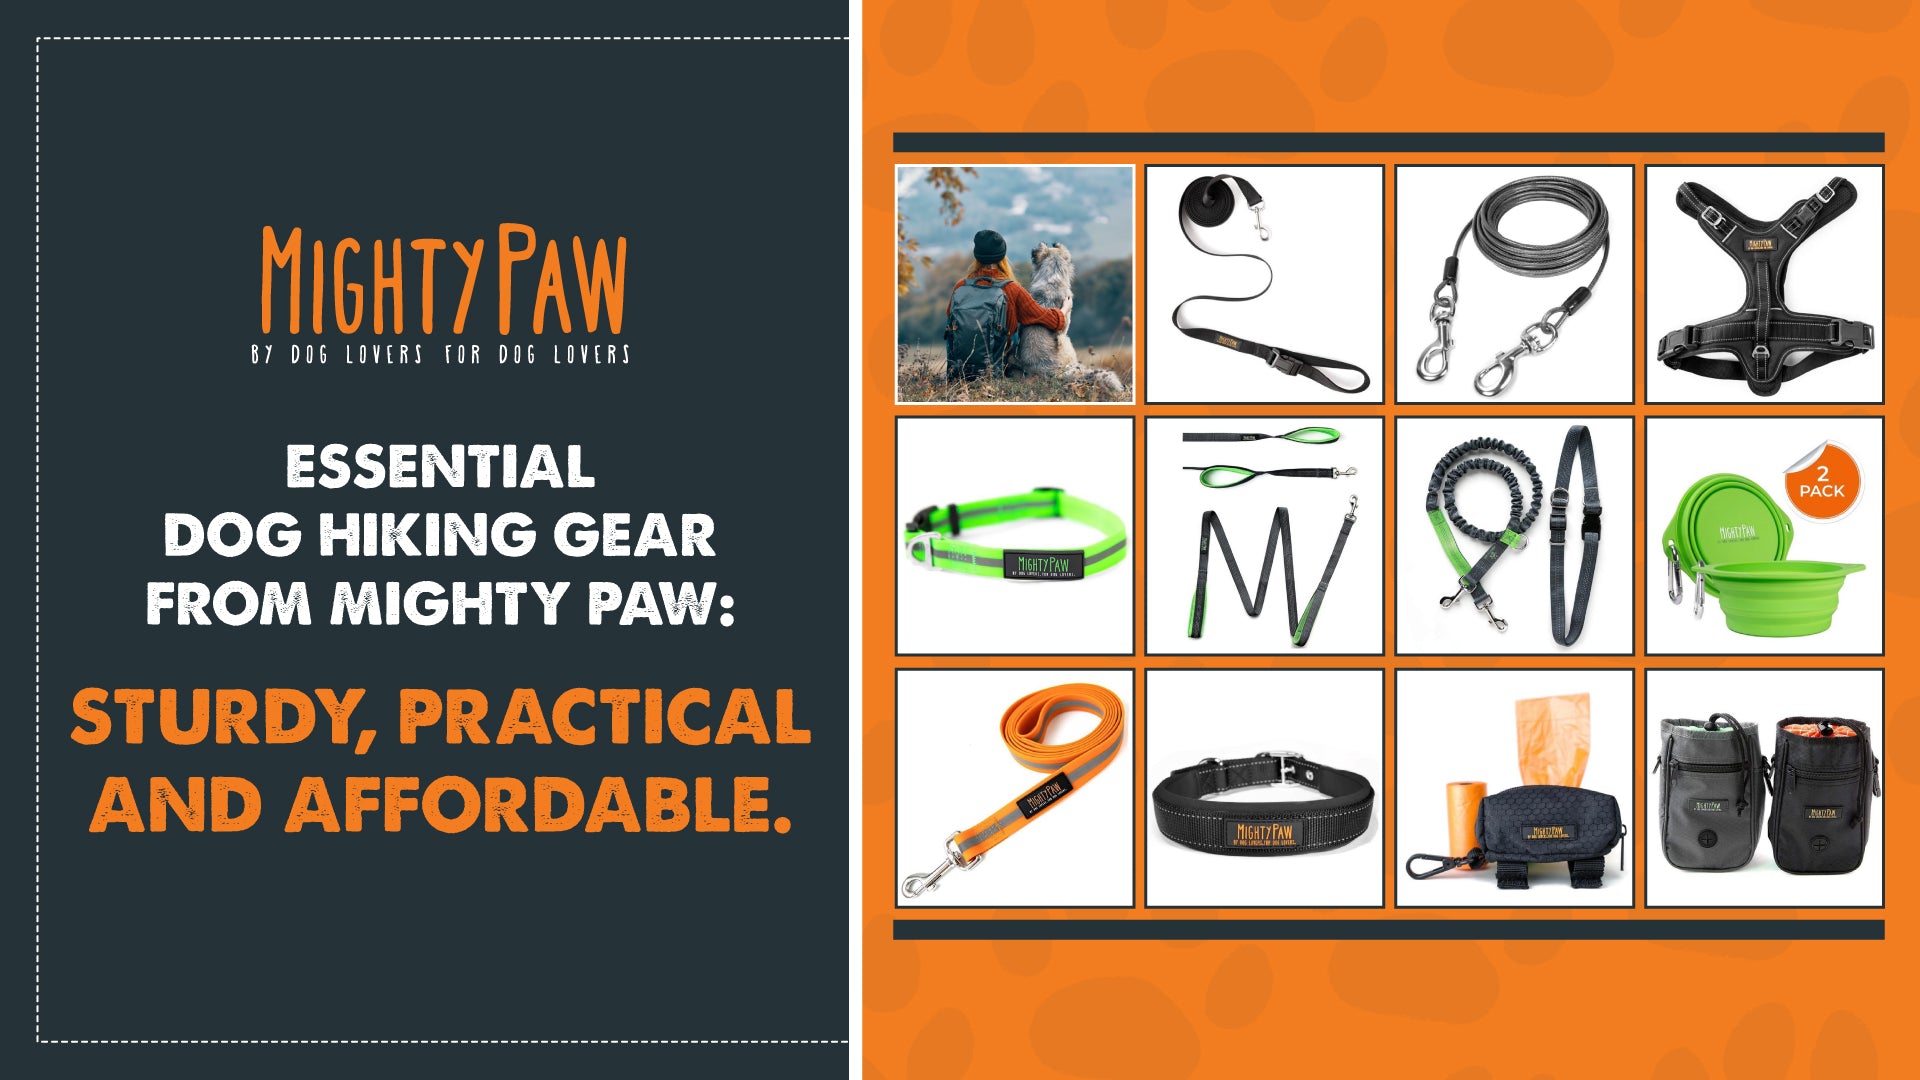 Essential dog hiking gear from Mighty Paw: Sturdy, practical and affordable